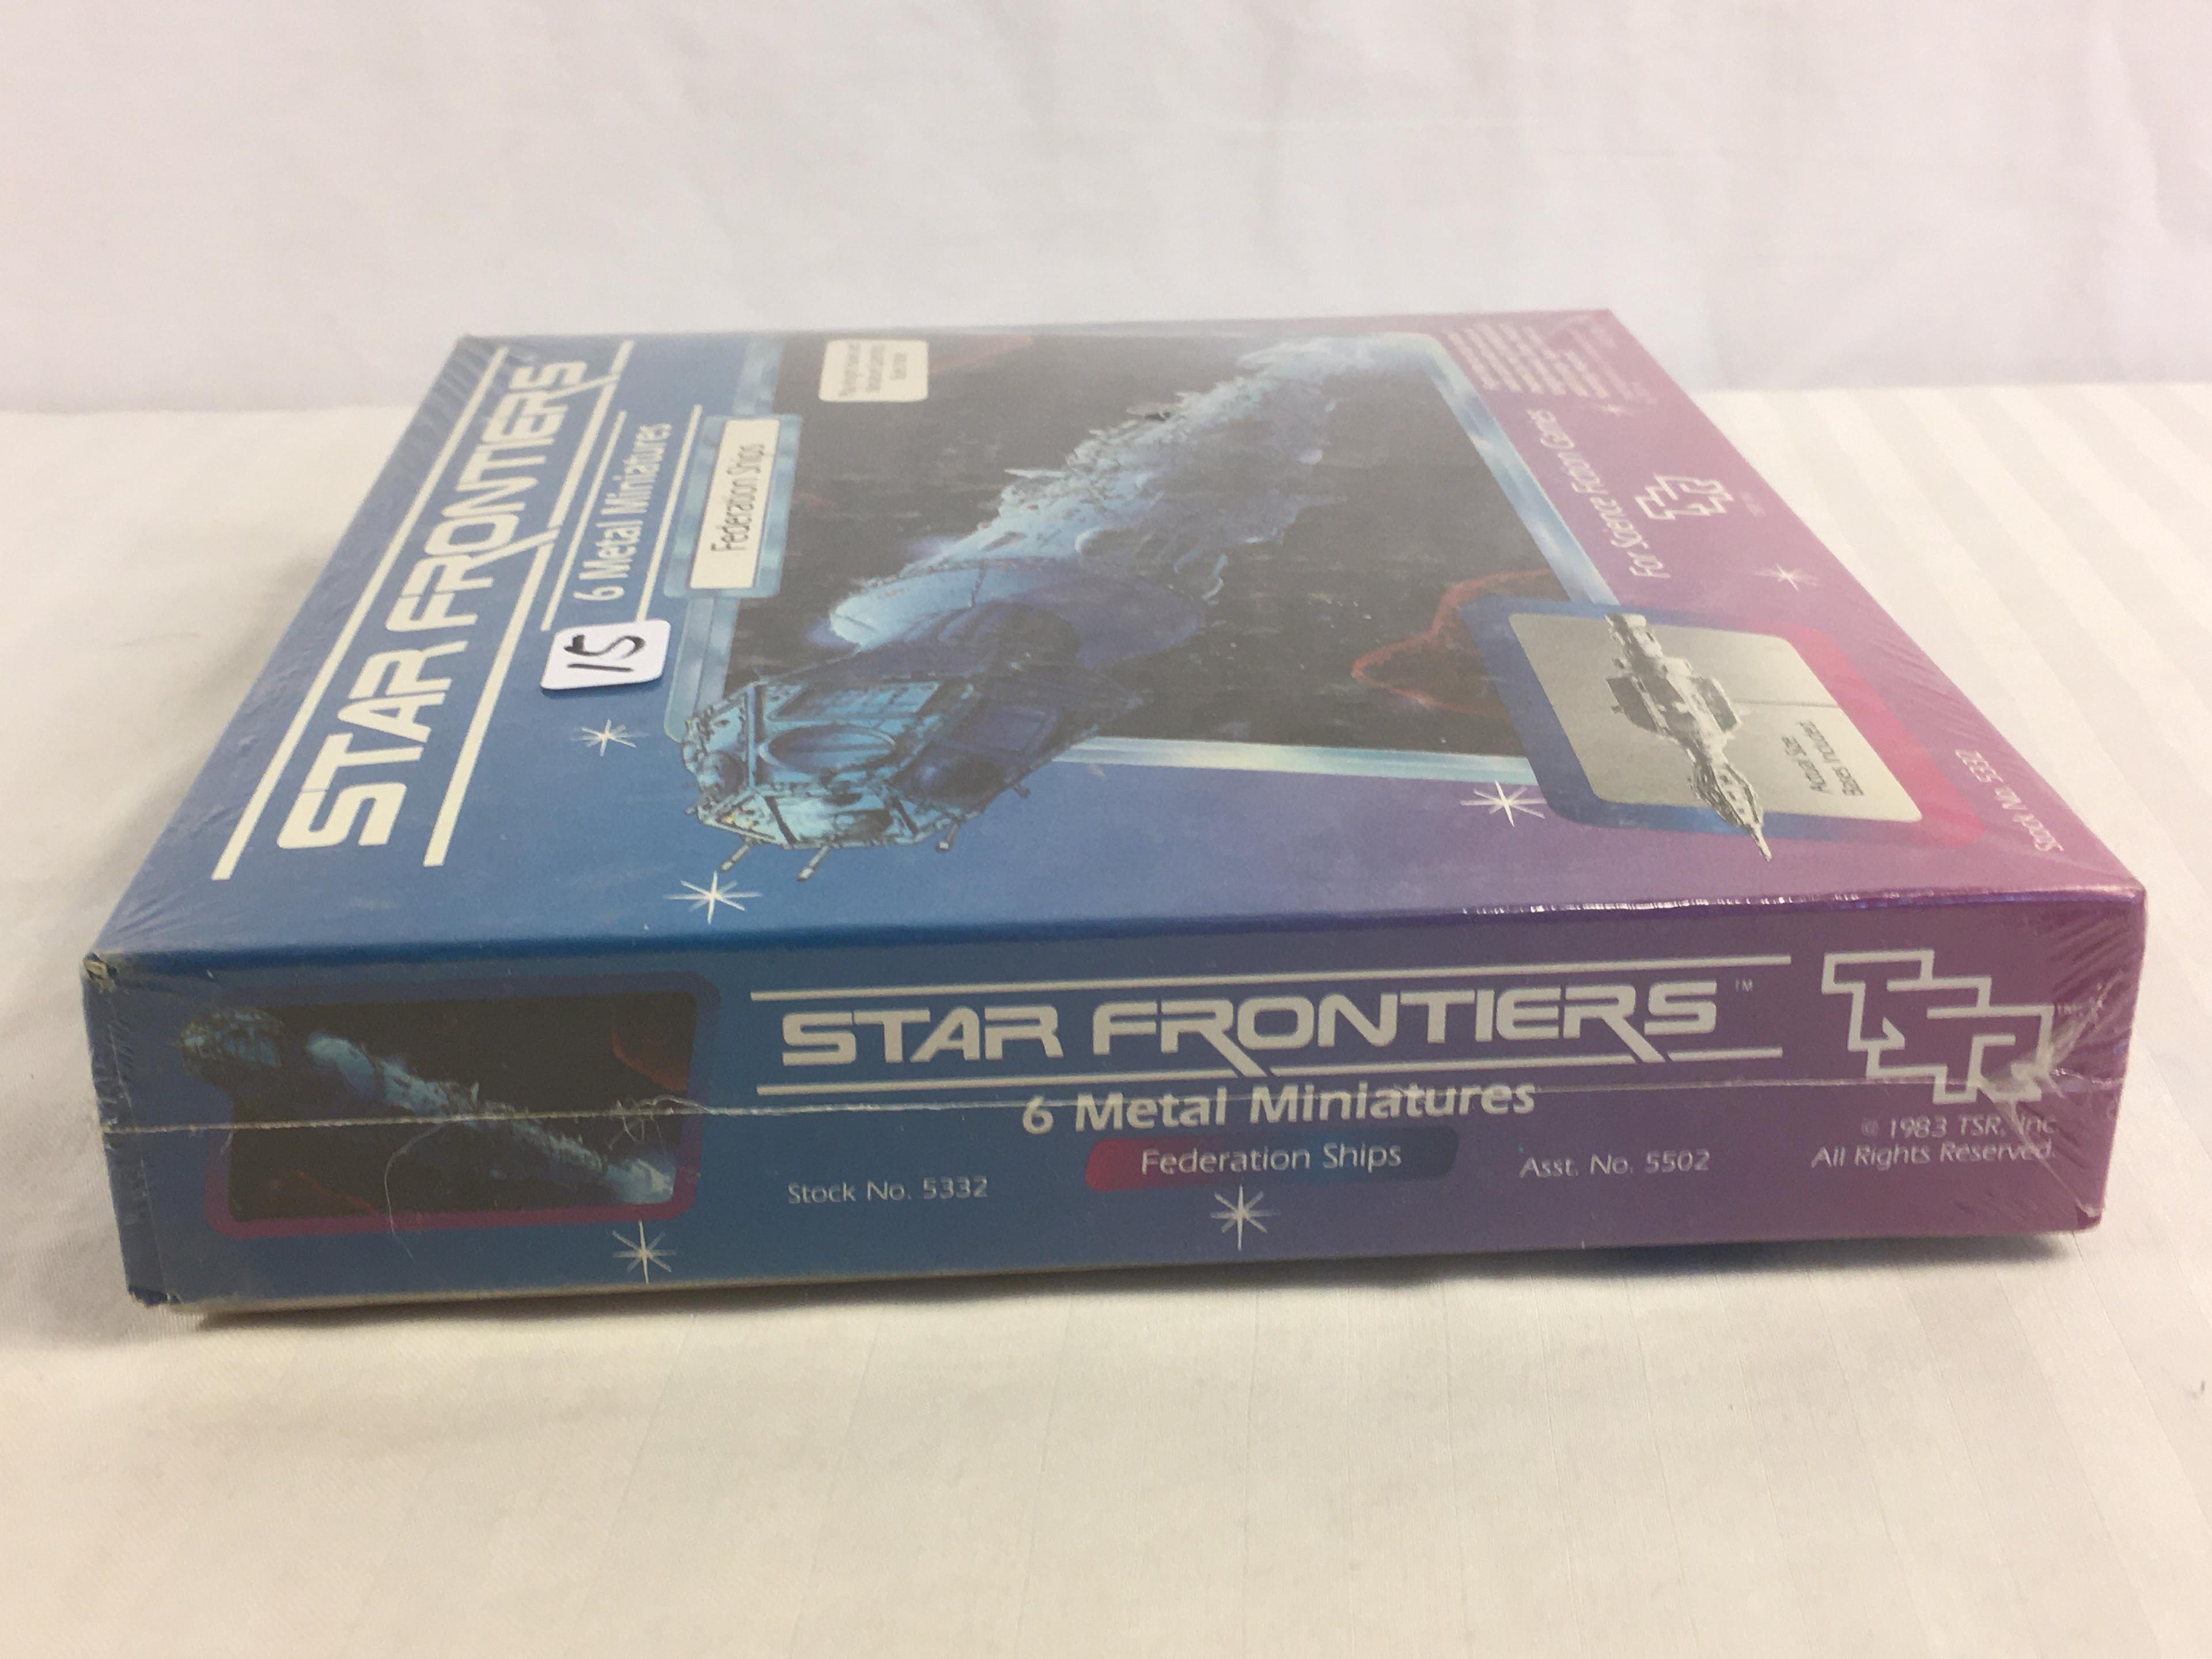 Collector TSR Star Frontier Federation Ships 6 Metal Minmiatures #5502  8.5"BY7" Box Size